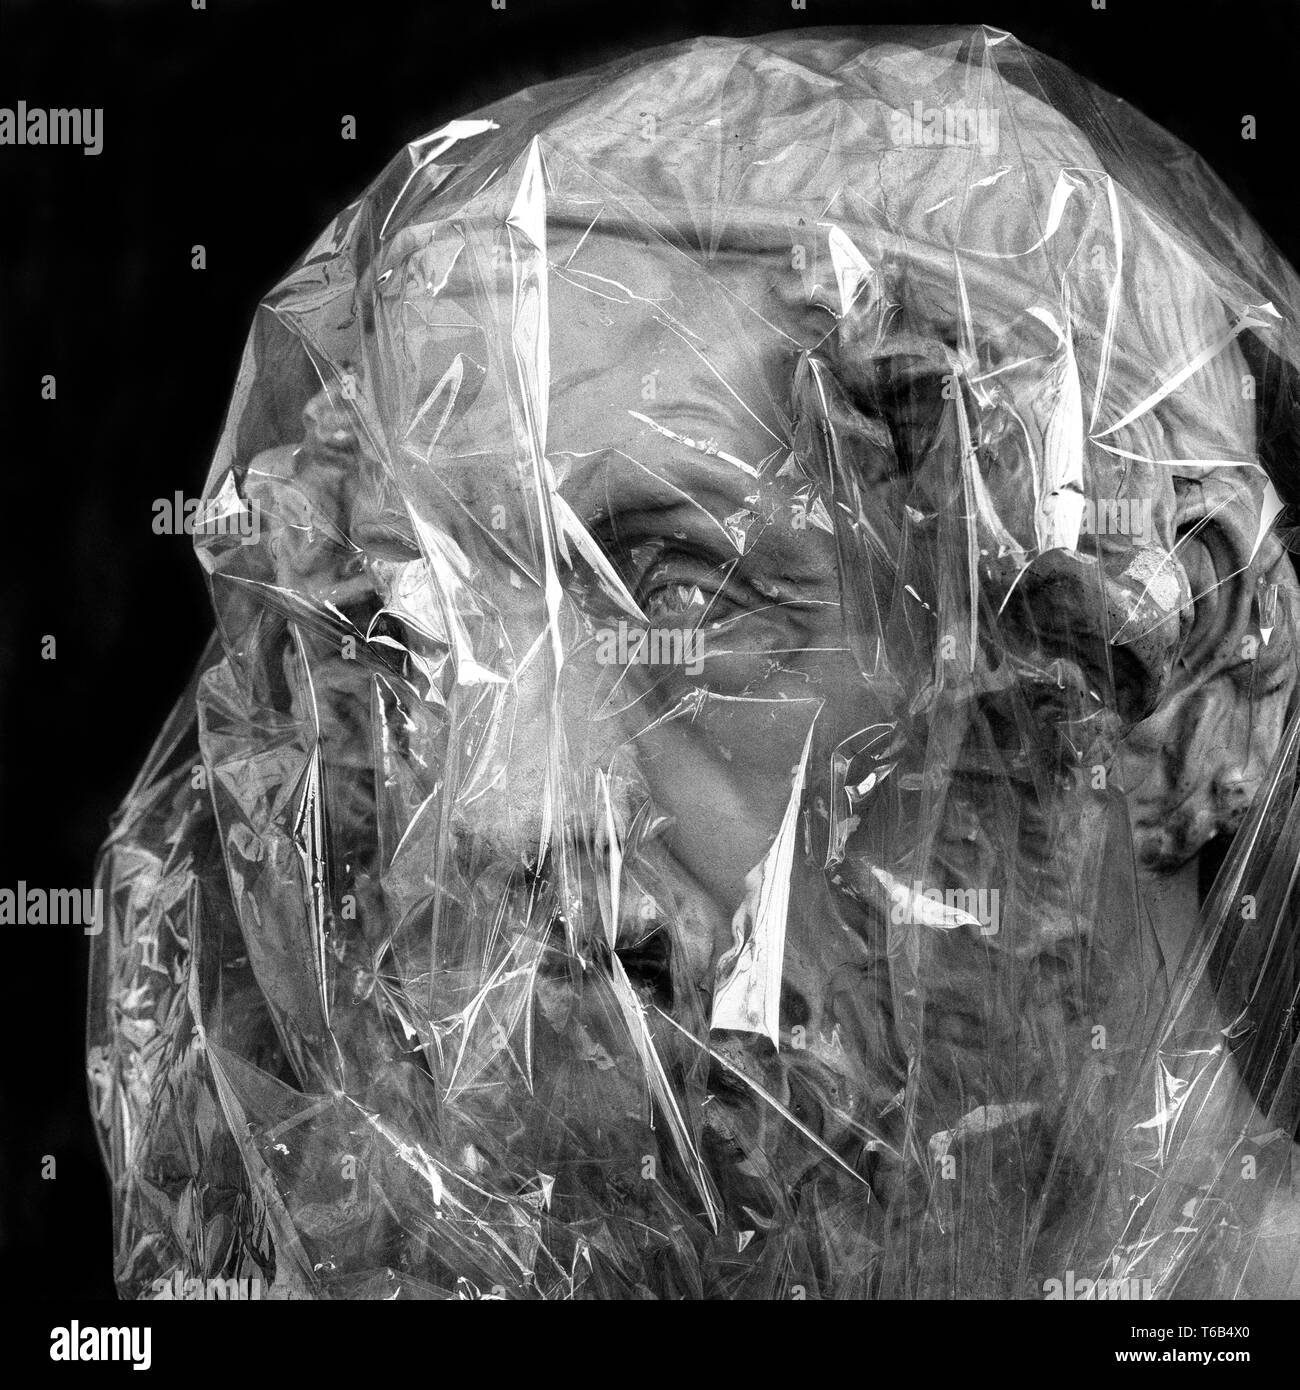 Homer Philosophy Plaster Head, Wrapped in Plastic Wrap Stock Photo